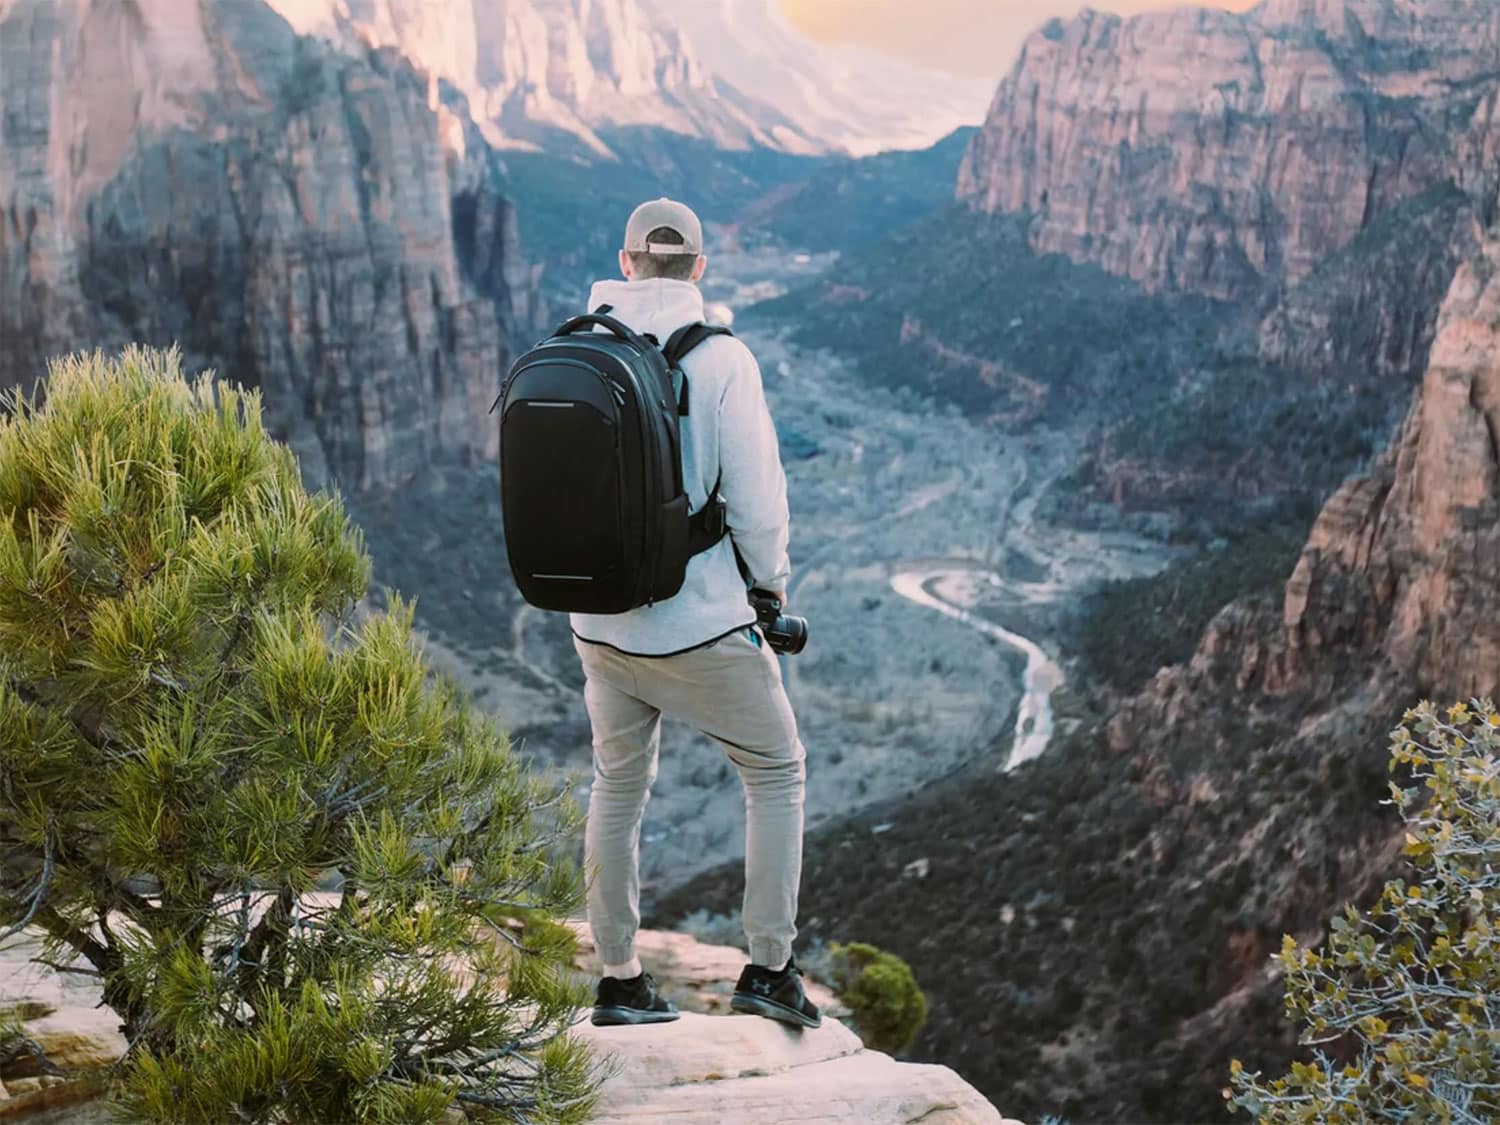 A male traveler admires scenery while wearing the Nomatic Navigator Travel Backpack 32L.